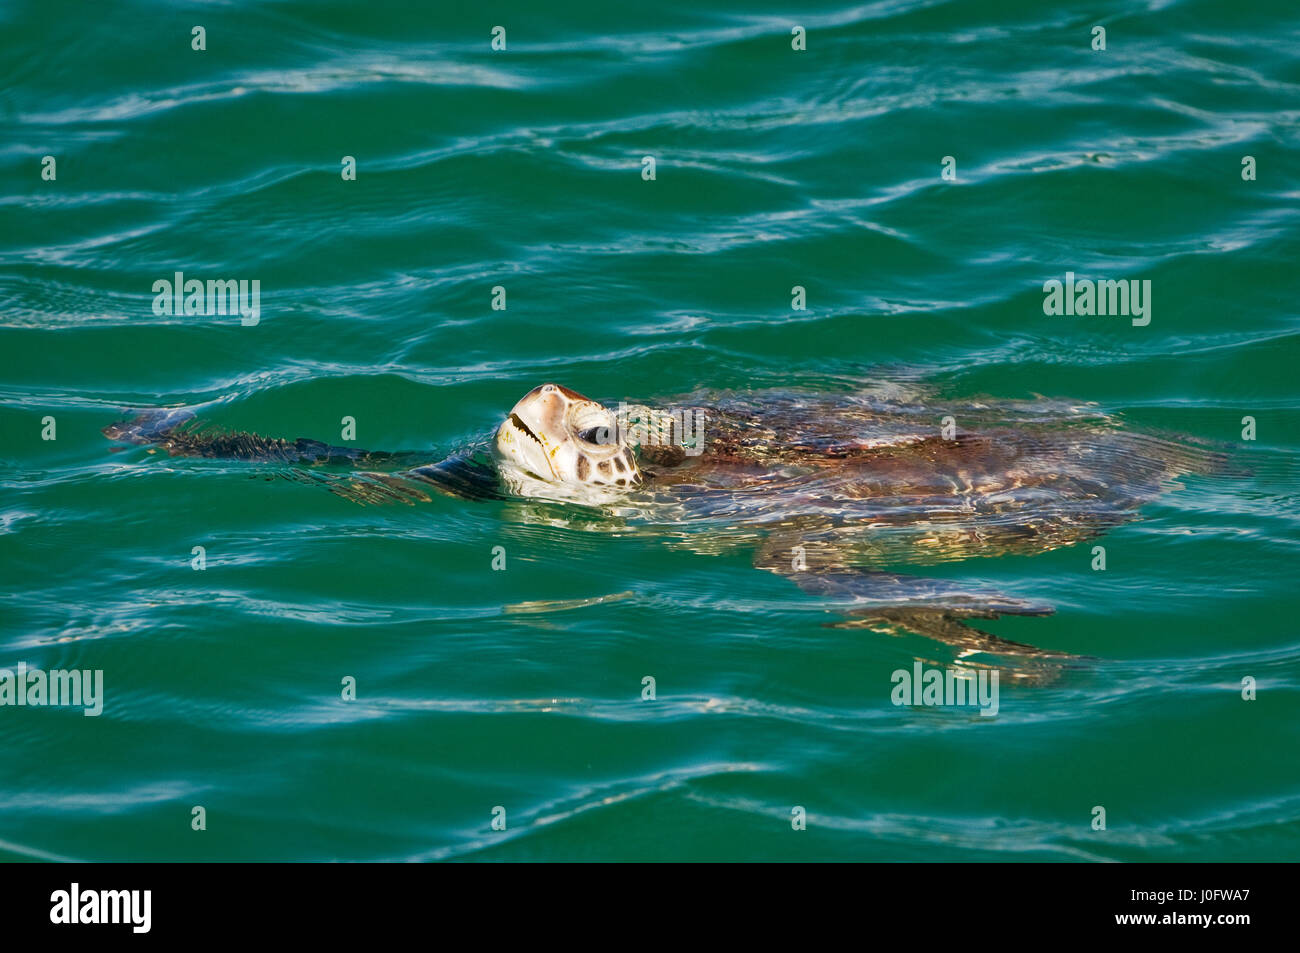 Green Sea Turtle breathing at the oceans surface. Stock Photo